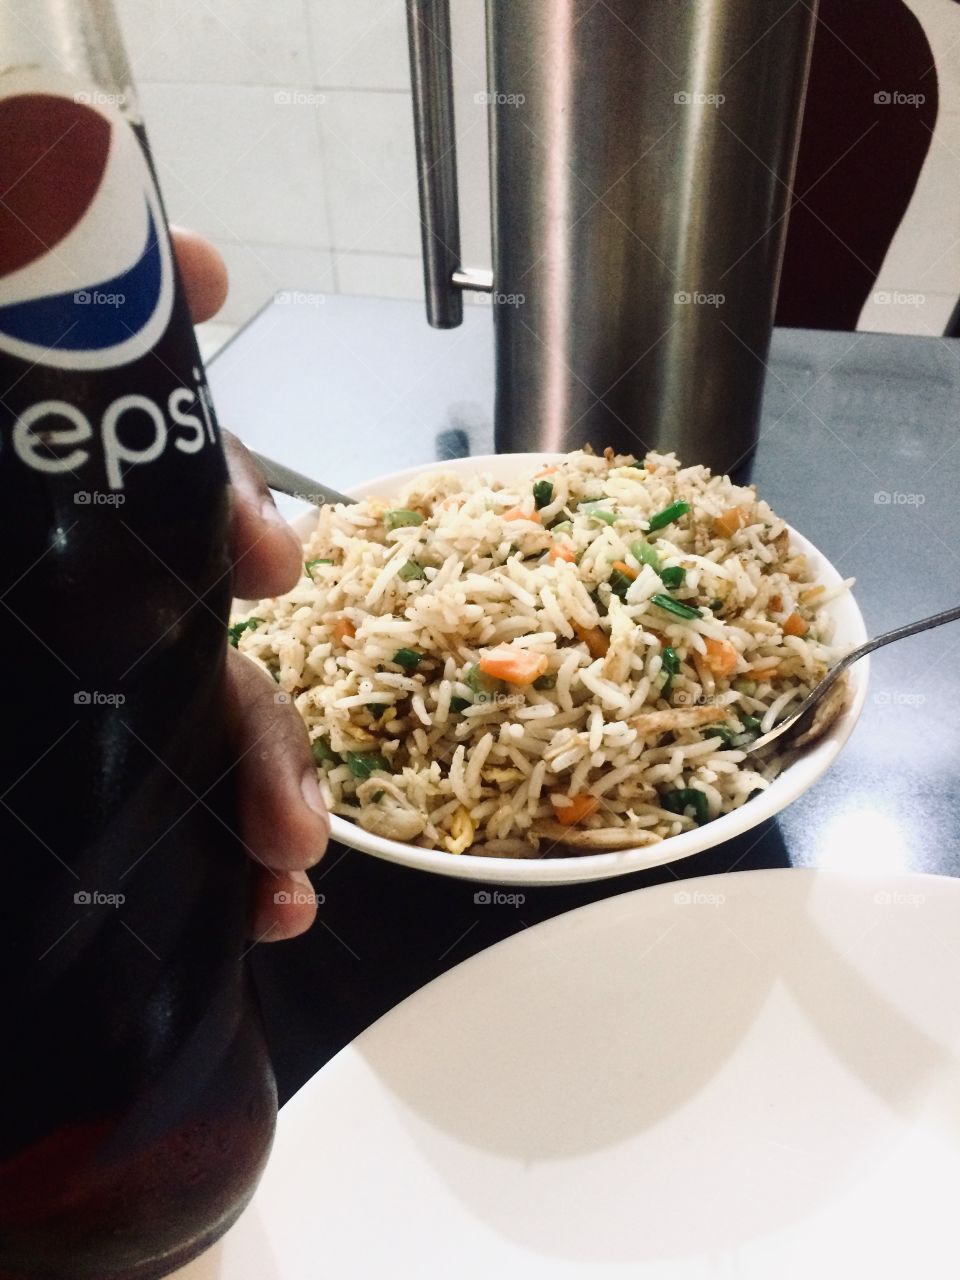 Food pepsi and chicken fried rice